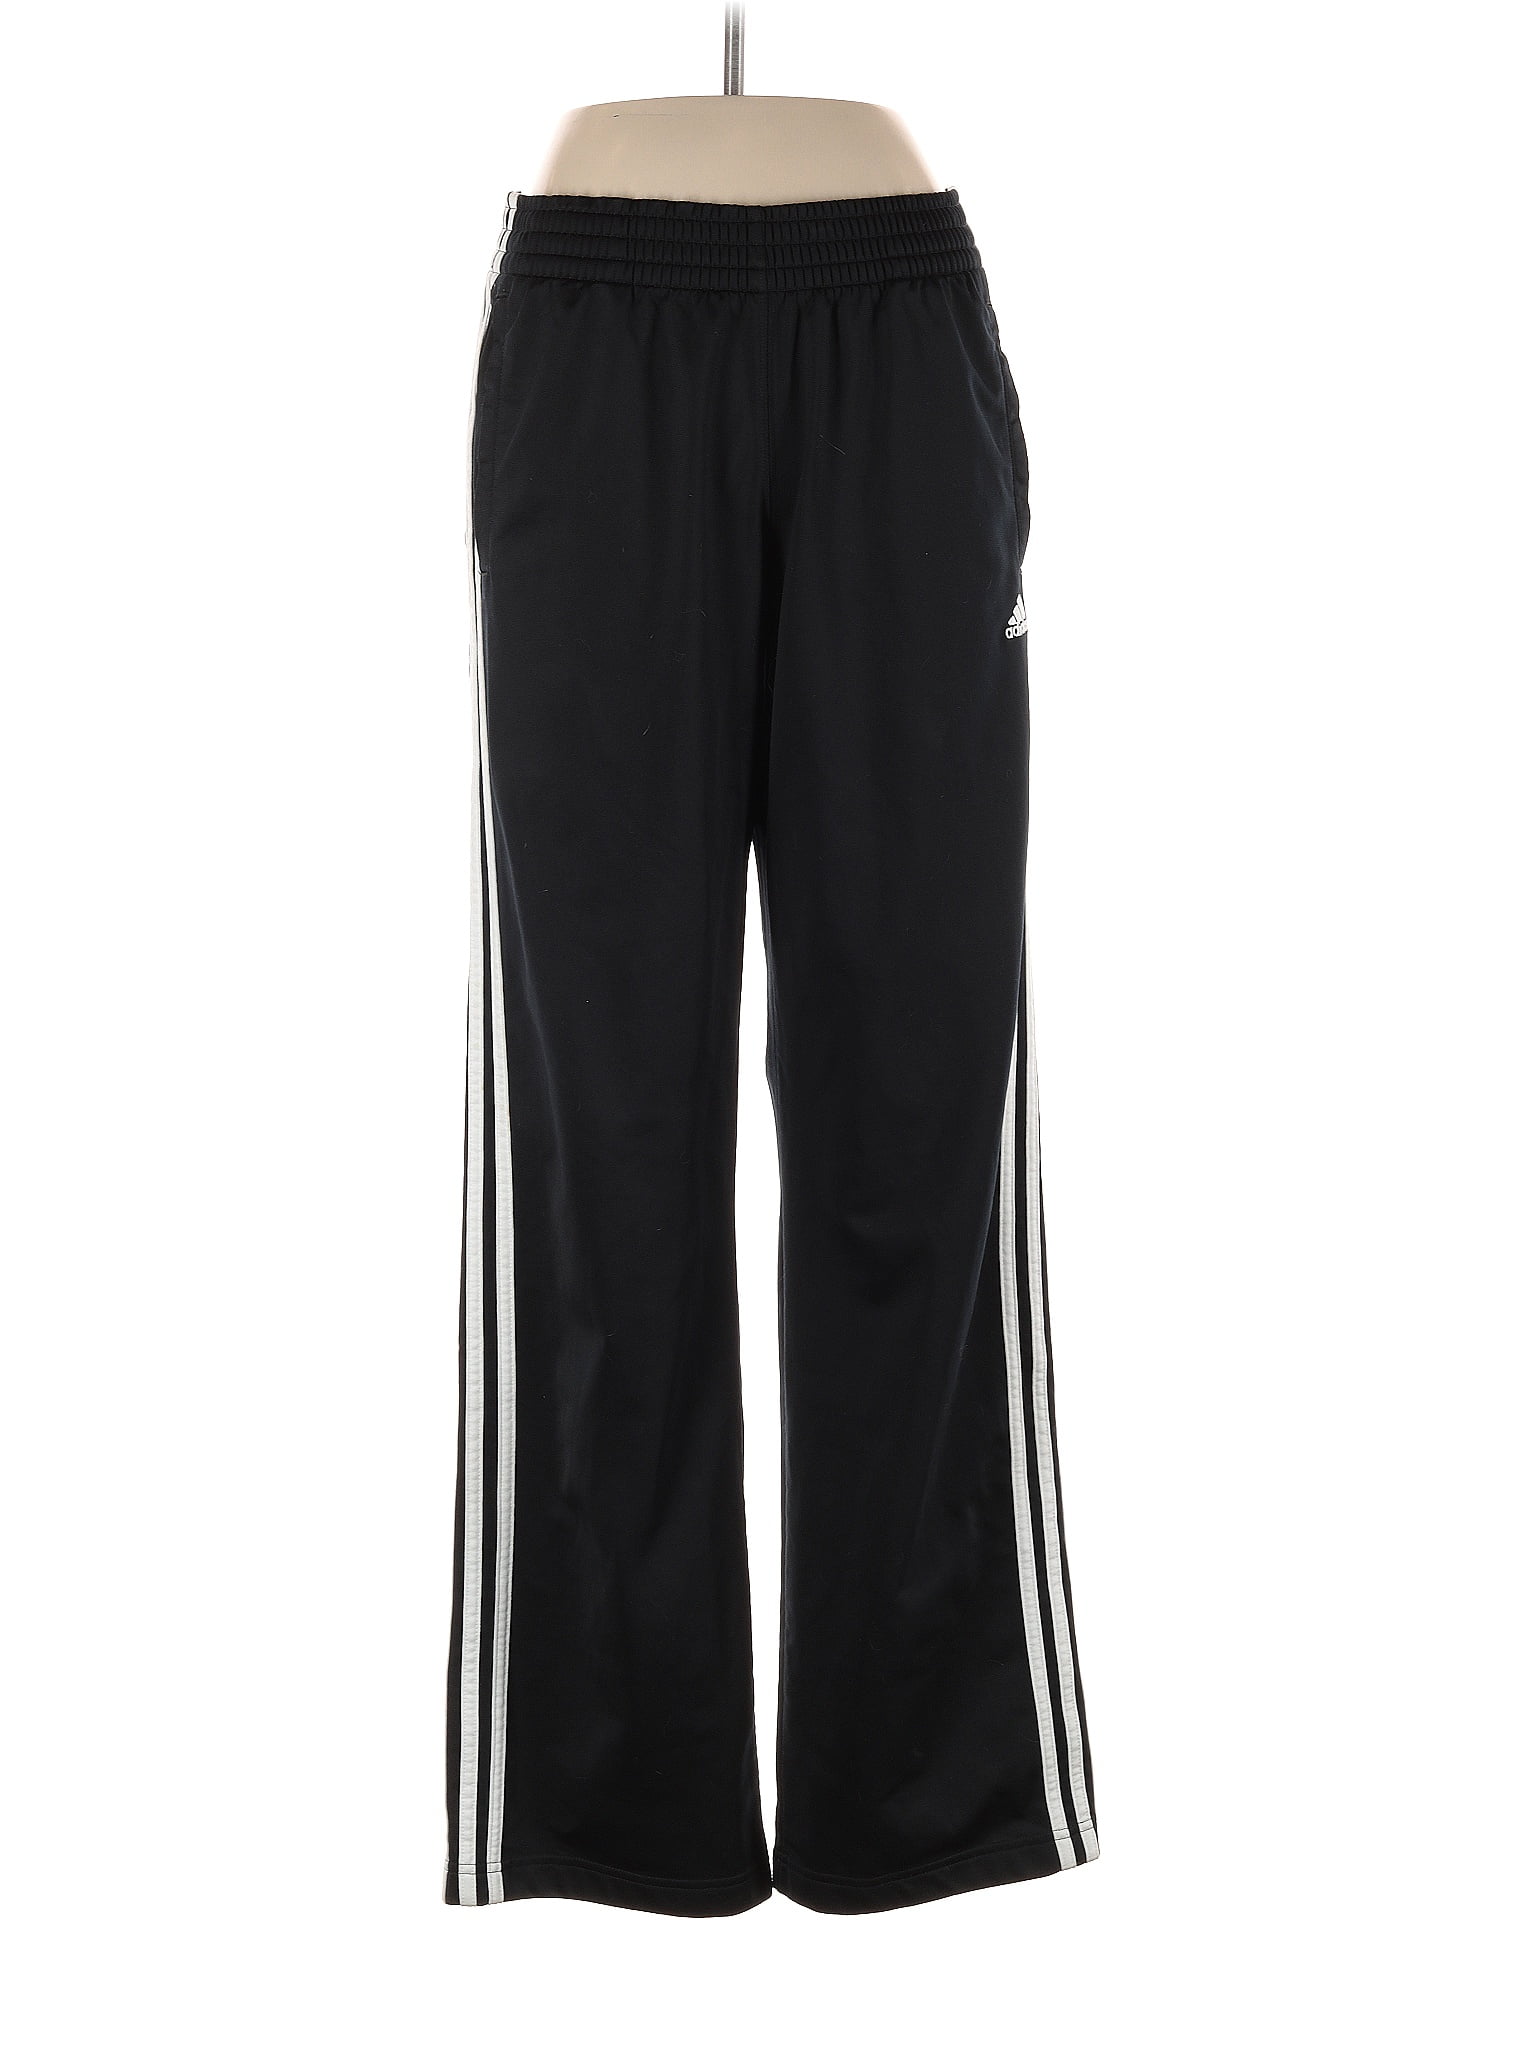 Adidas 100% Polyester Black Active Pants Size XL - 61% off